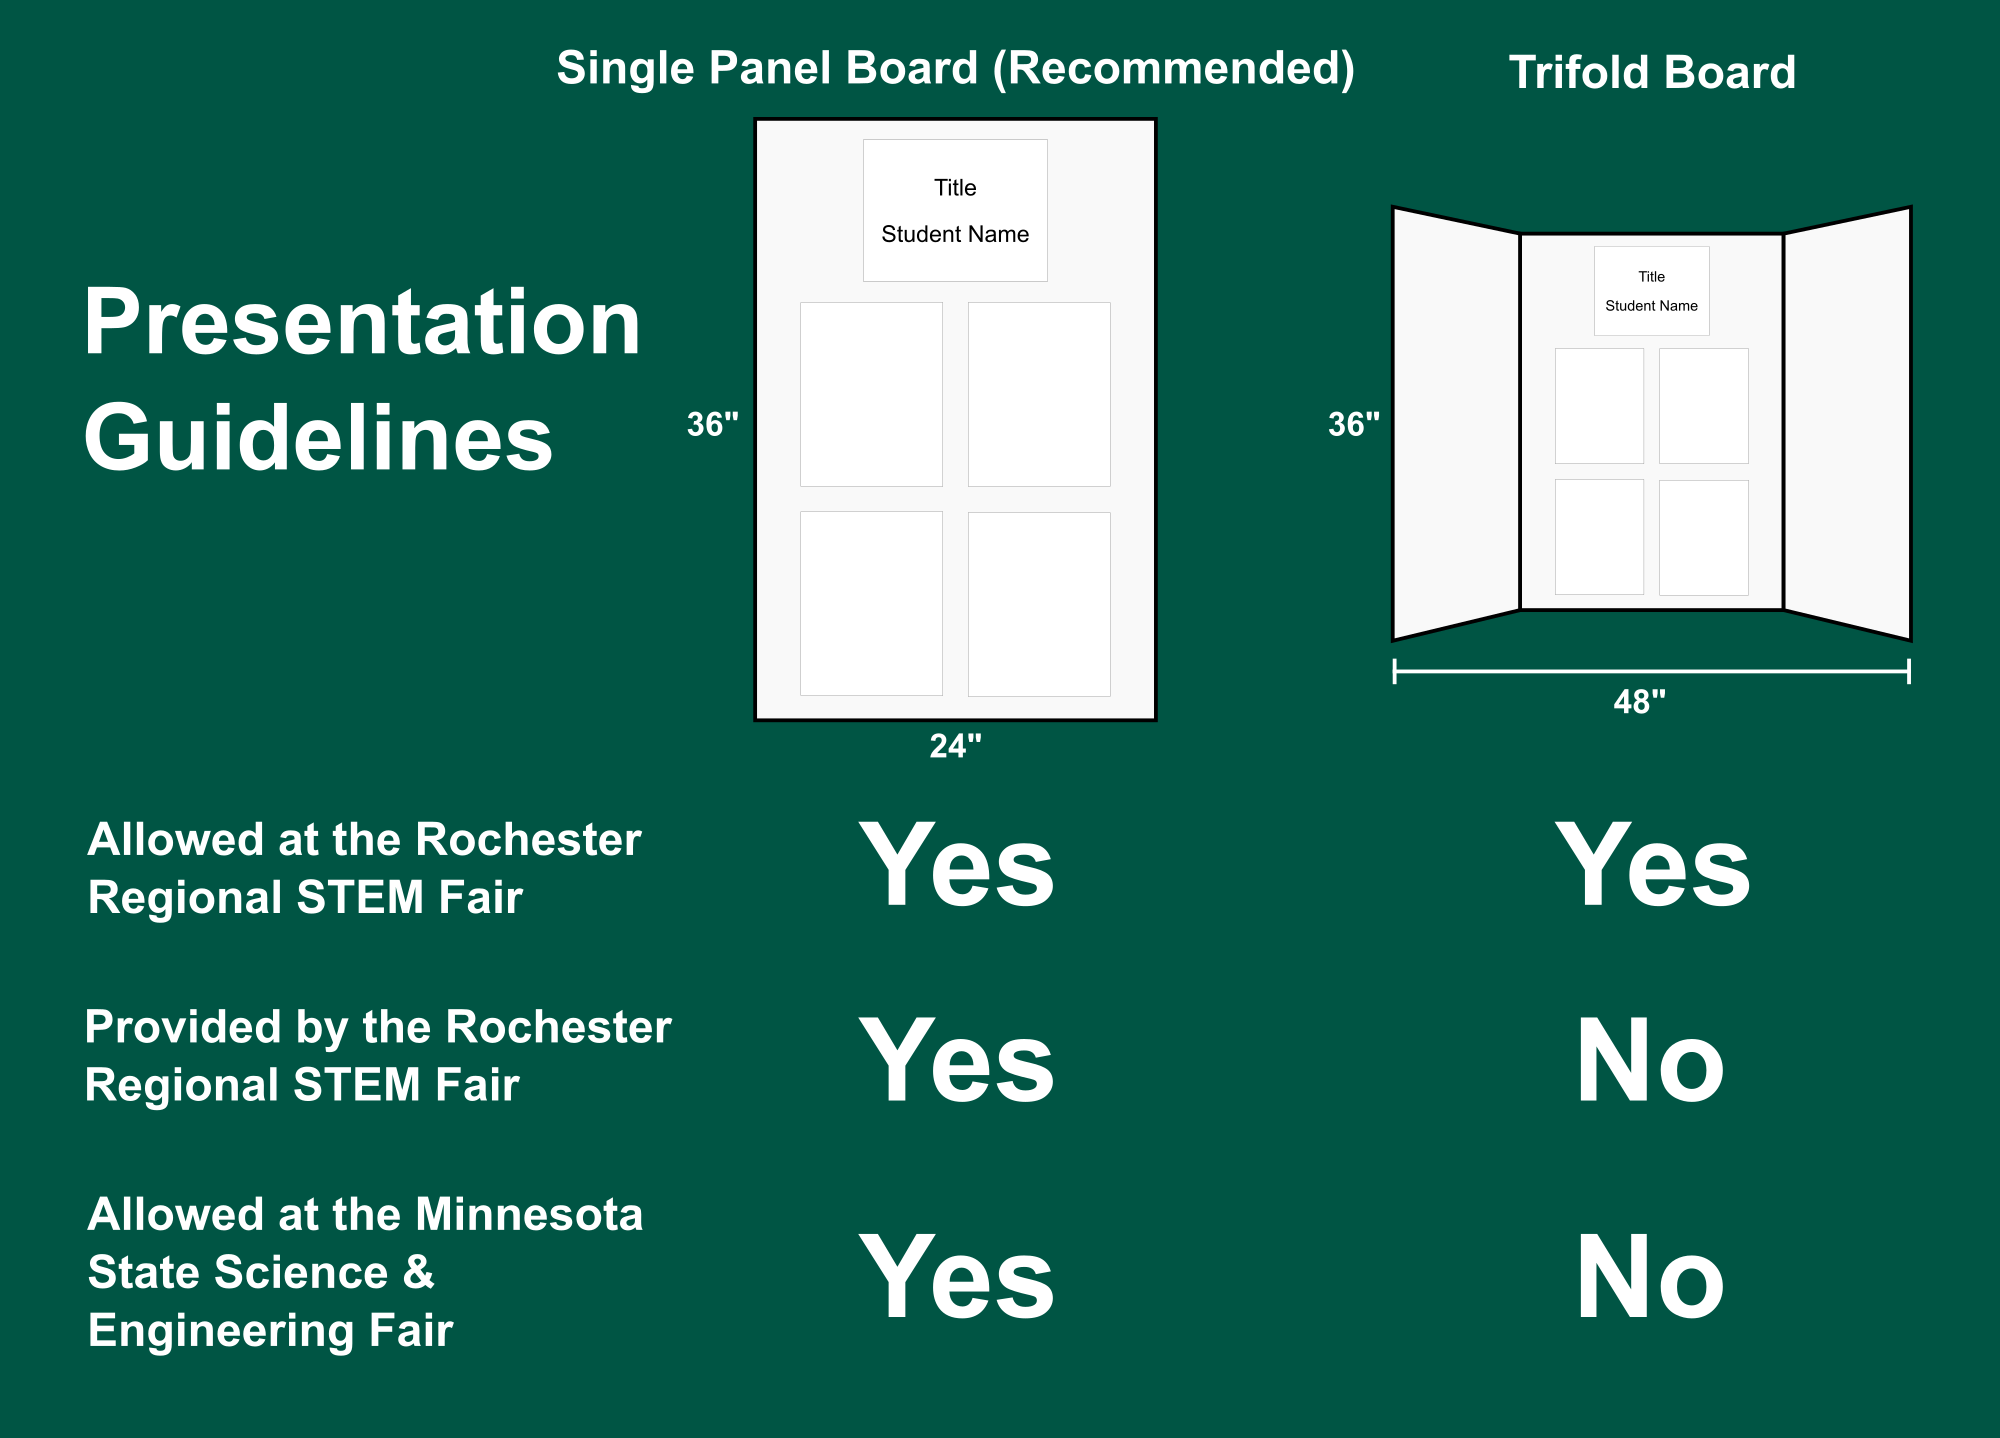 comparing signle paneld and trifold boards. Both are allowed at the Rochester Regional STEM Fair. Single panel are provided by the STEM Fair. The trifold boards are not allowed at the Minnesota State Science & Engineering Fair